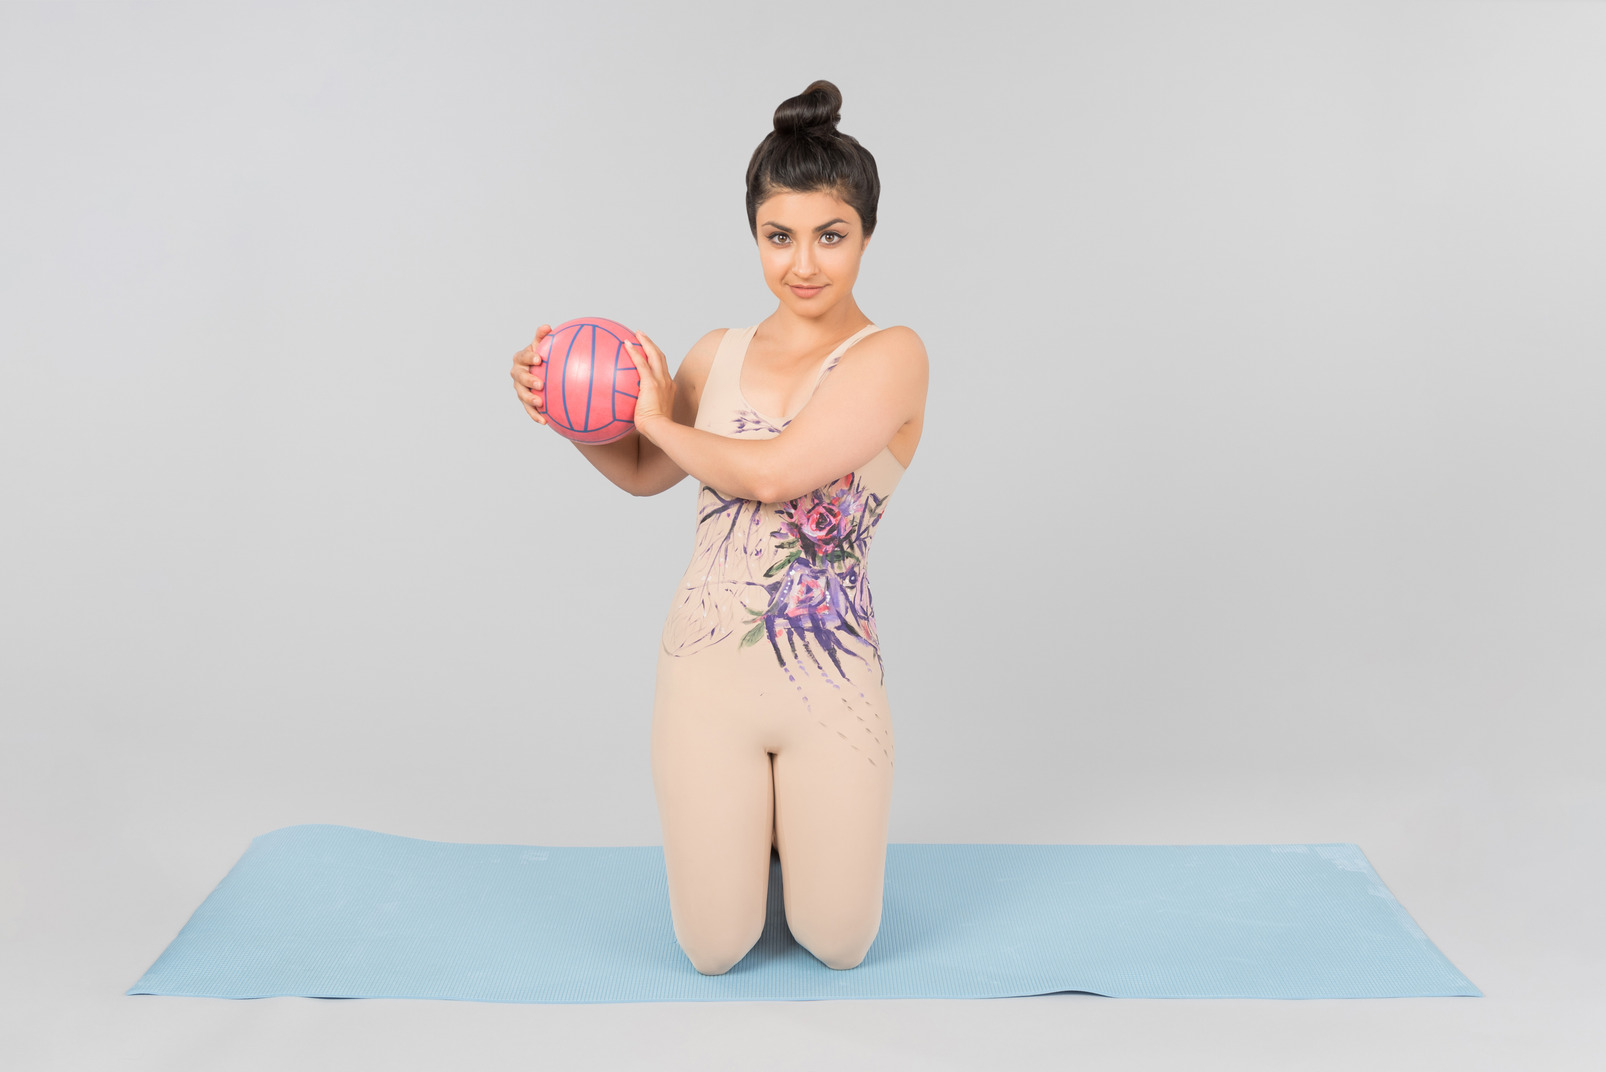 Young indian gymnast sitting on yoga mat and holding ball with both hands